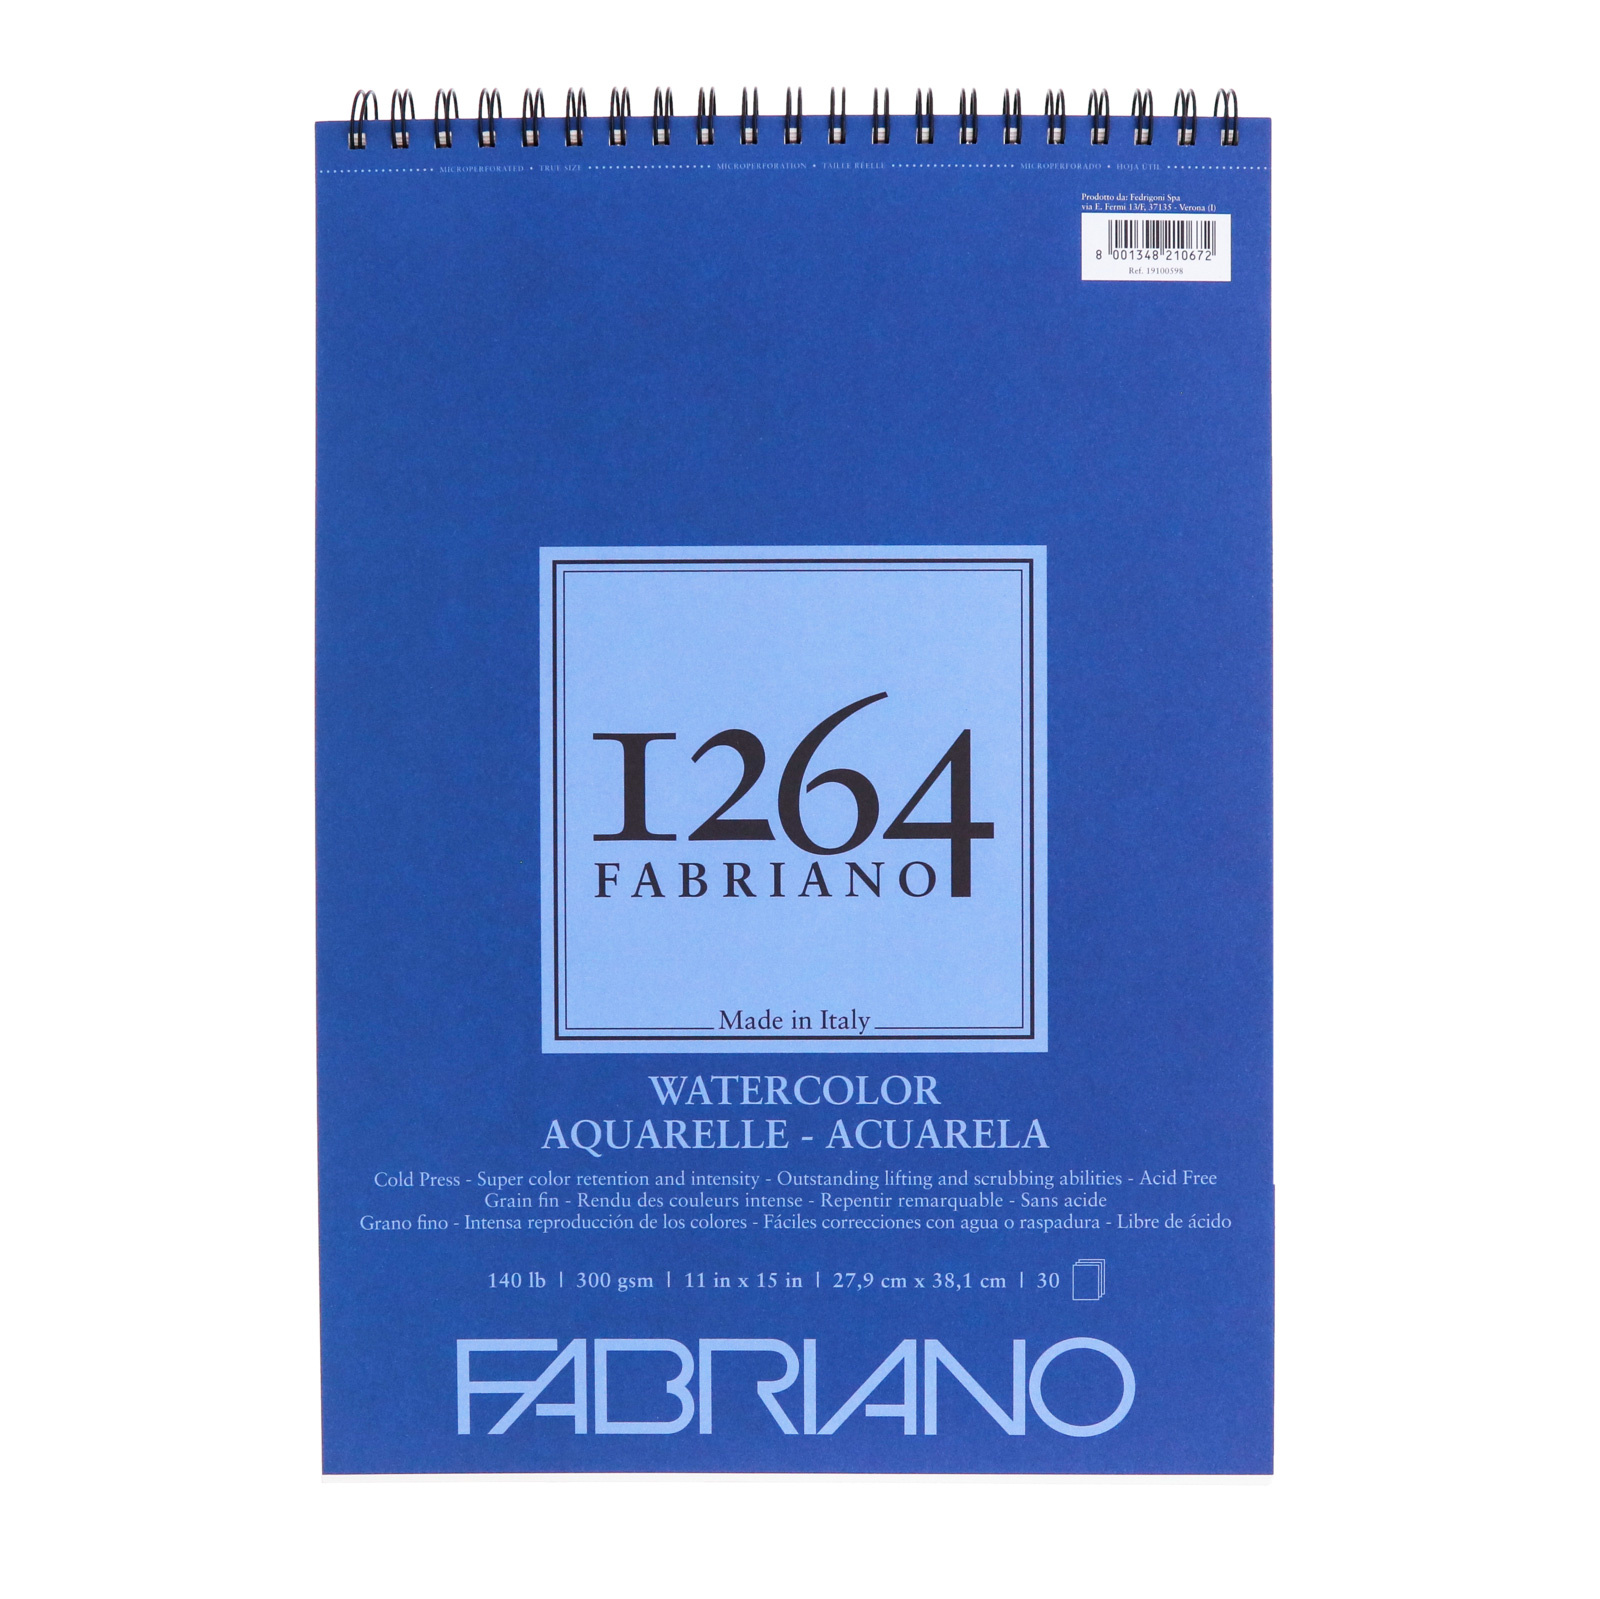 Fabriano 1264 Watercolor Pads, Spiral-Bound, 11" x 15"